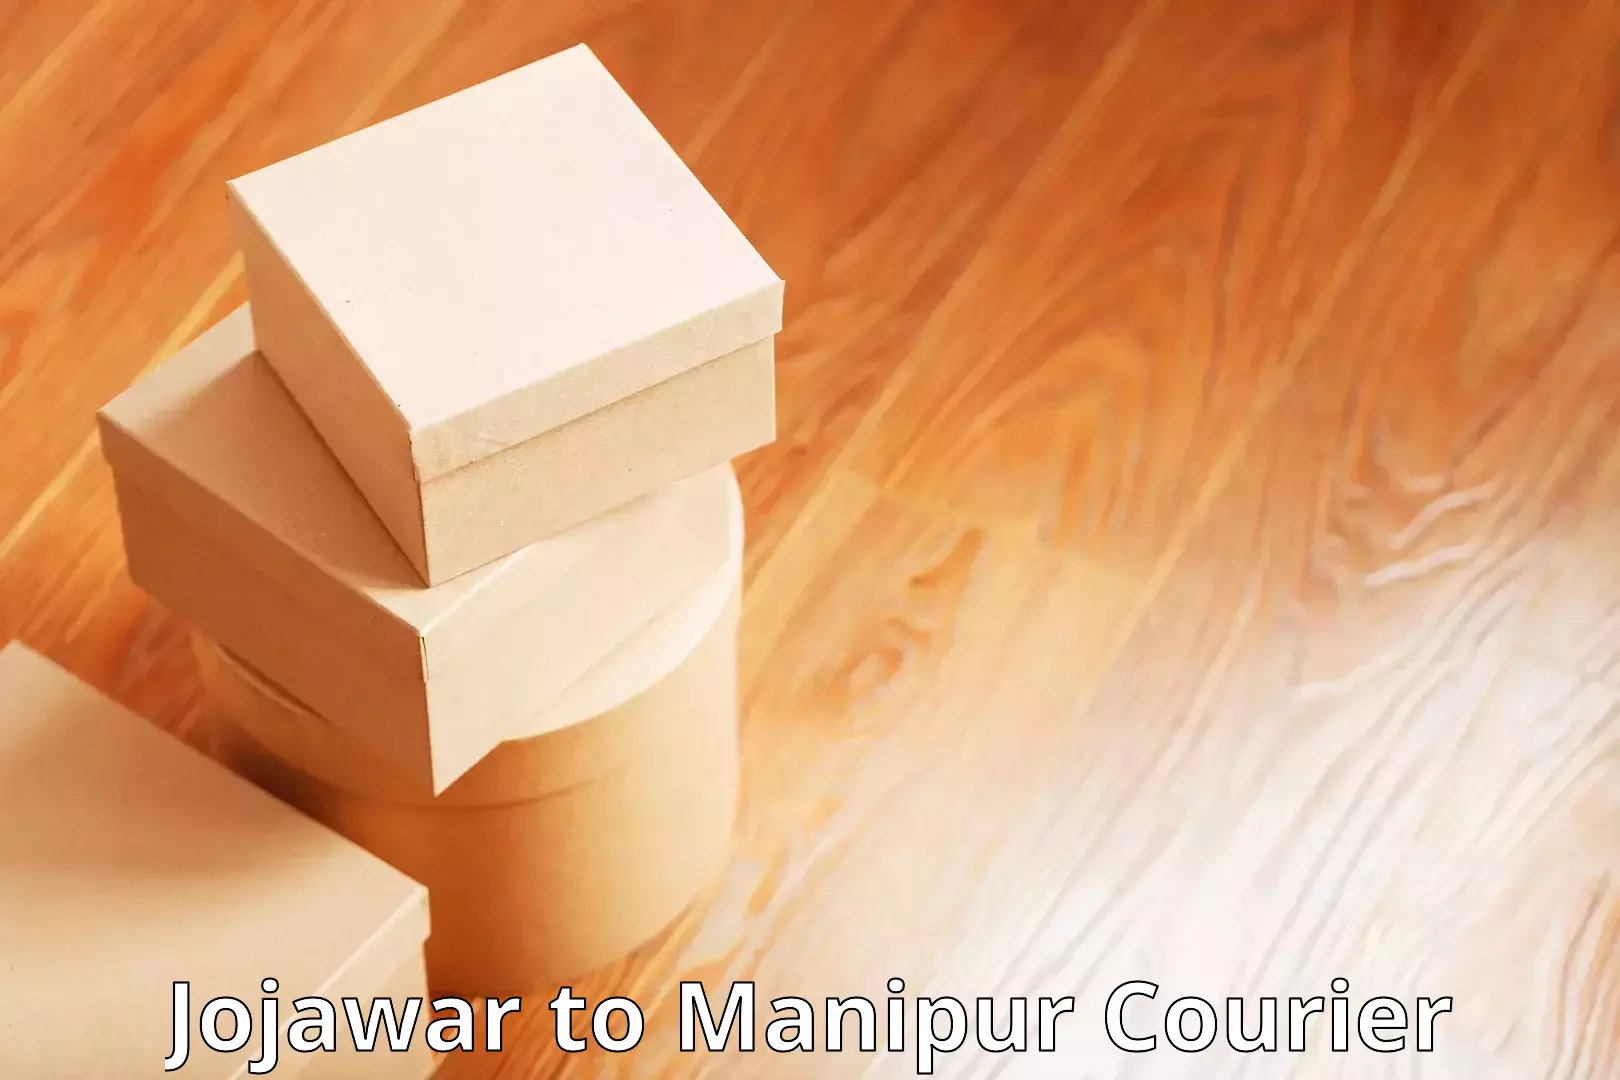 State-of-the-art courier technology Jojawar to Manipur